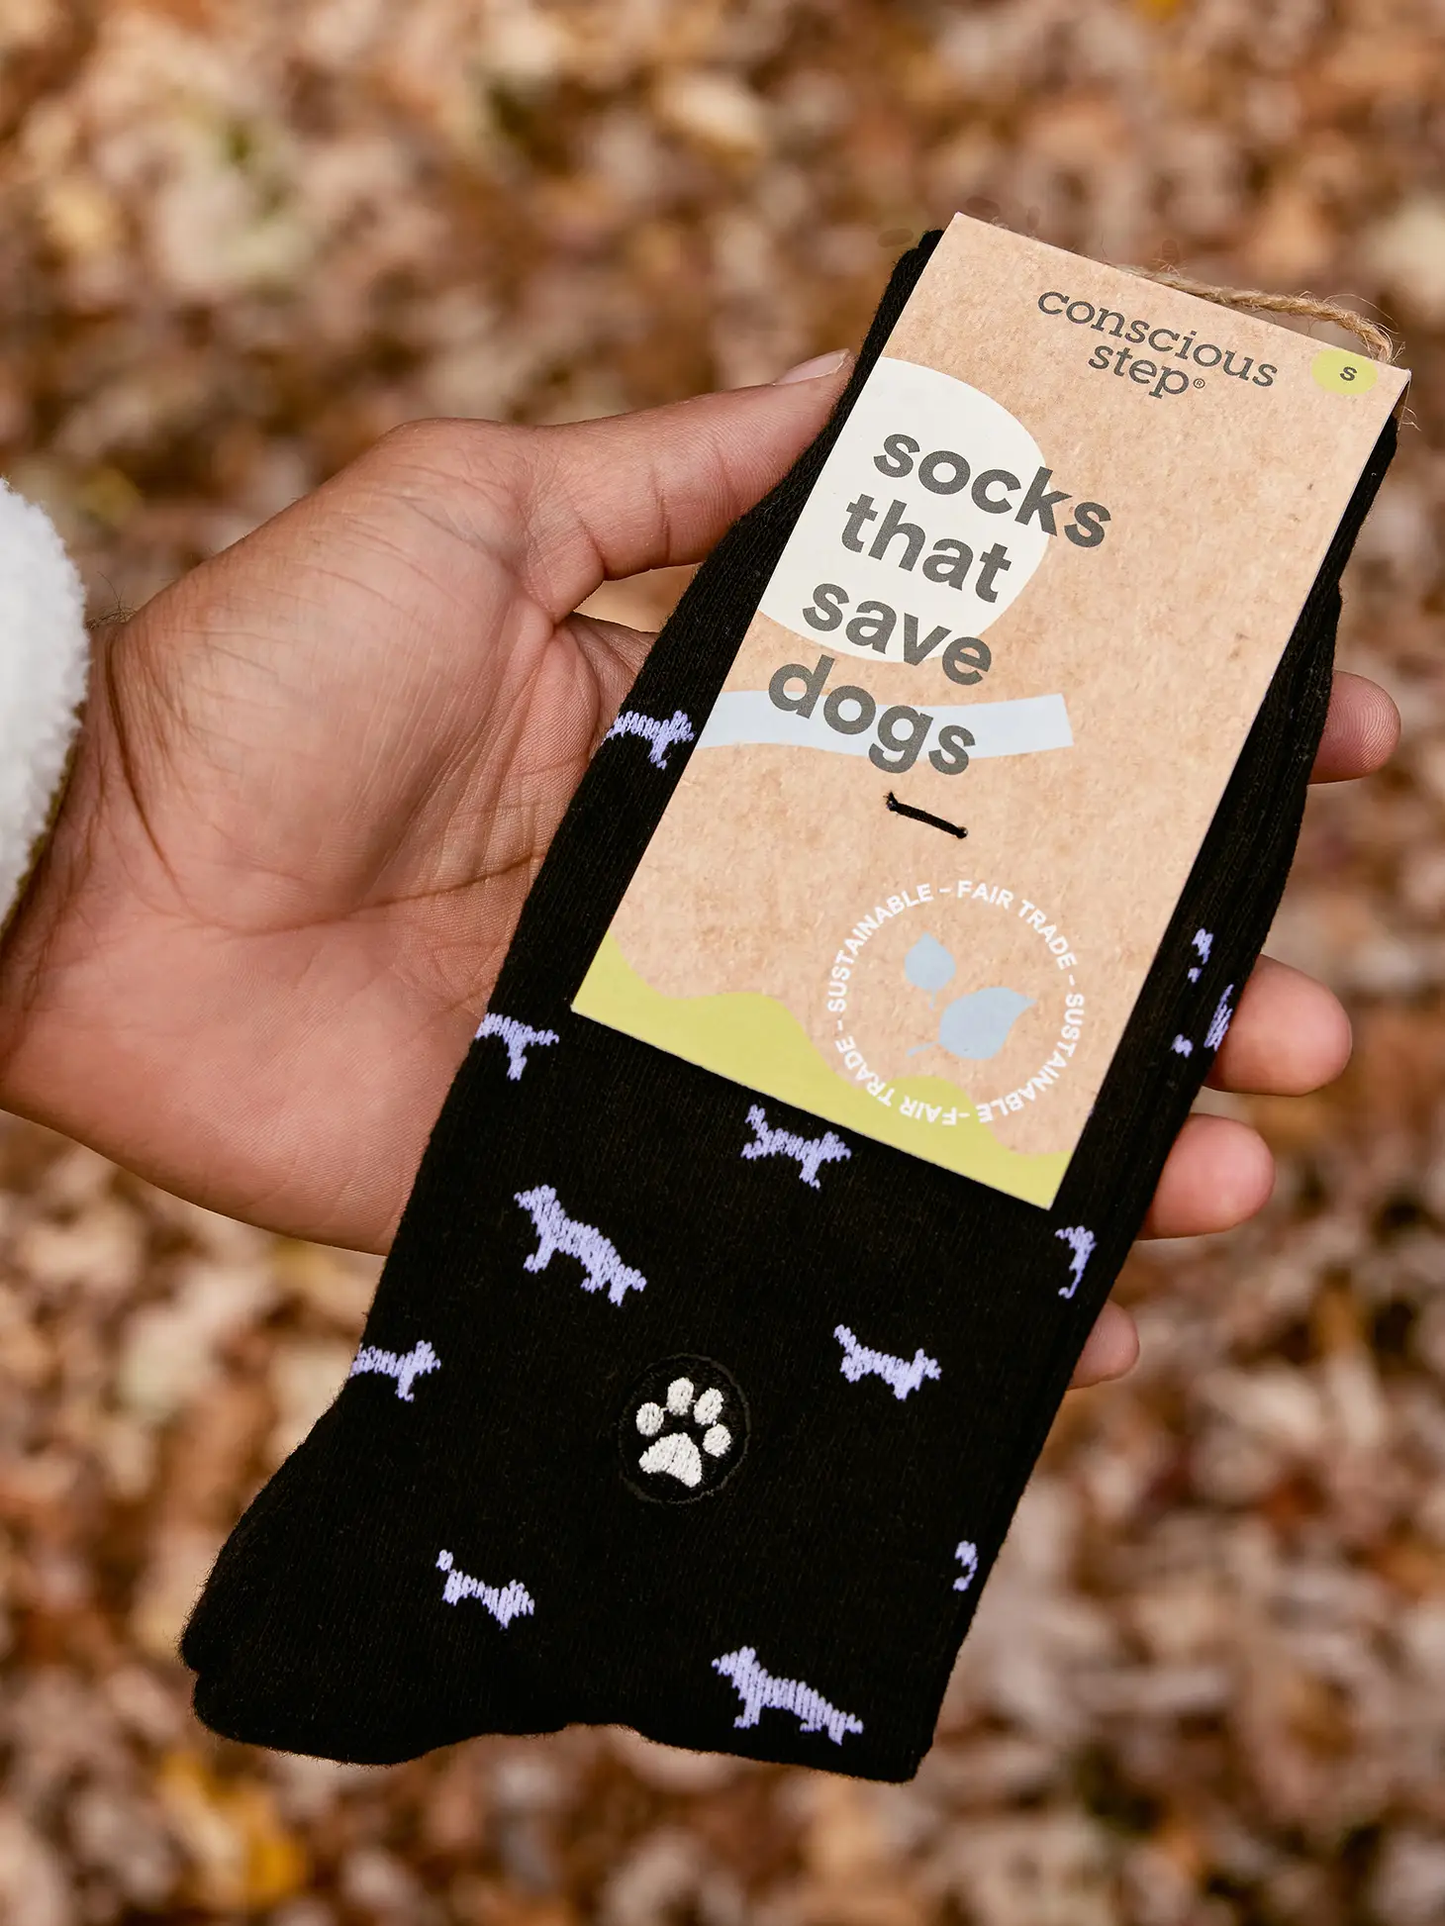 Socks That Save Dogs